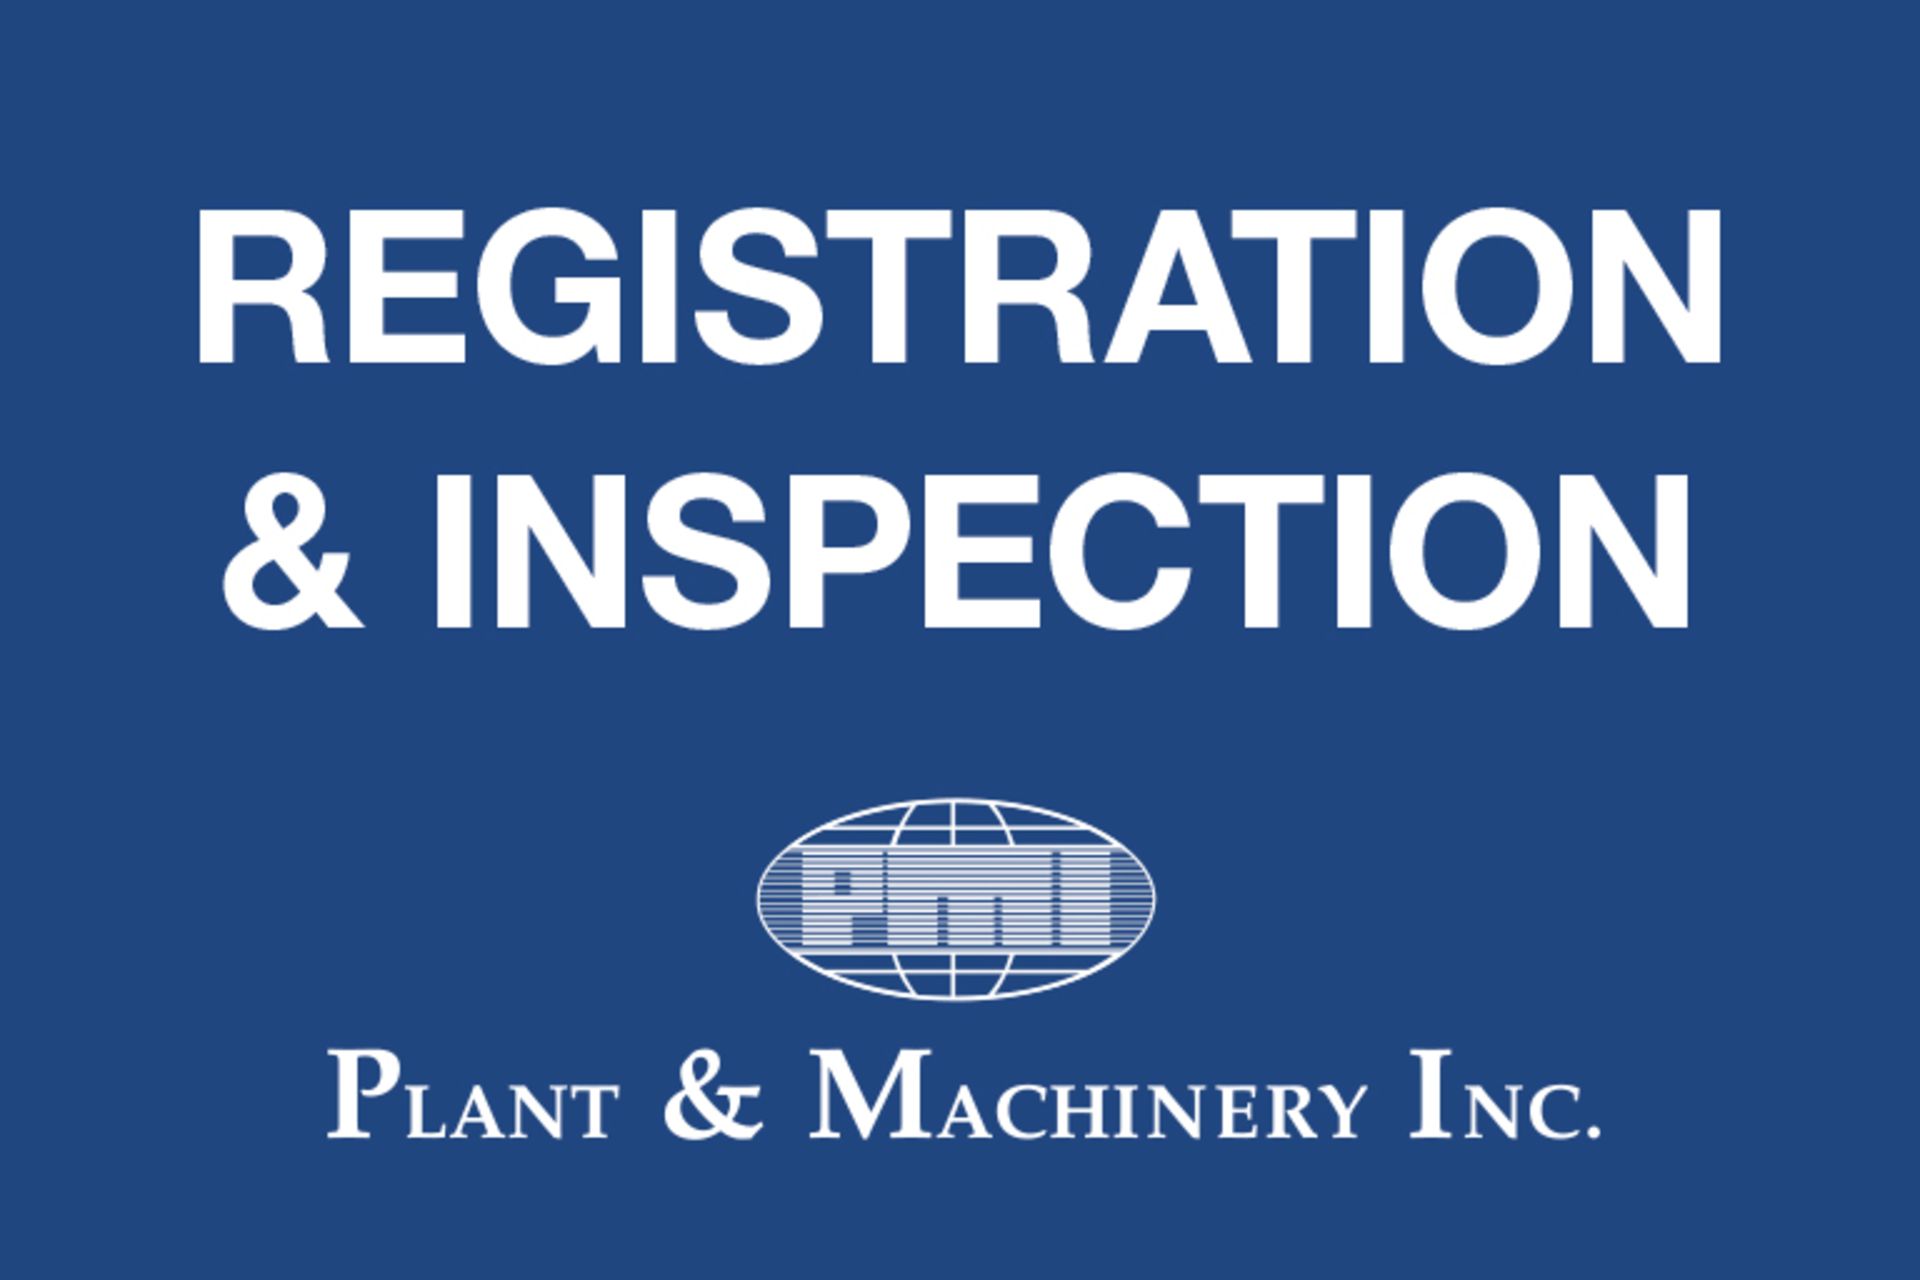 Inspection for this auction will be Monday & Tuesday, June 3 & 4, 9:00 a.m. to 4:00 p.m.